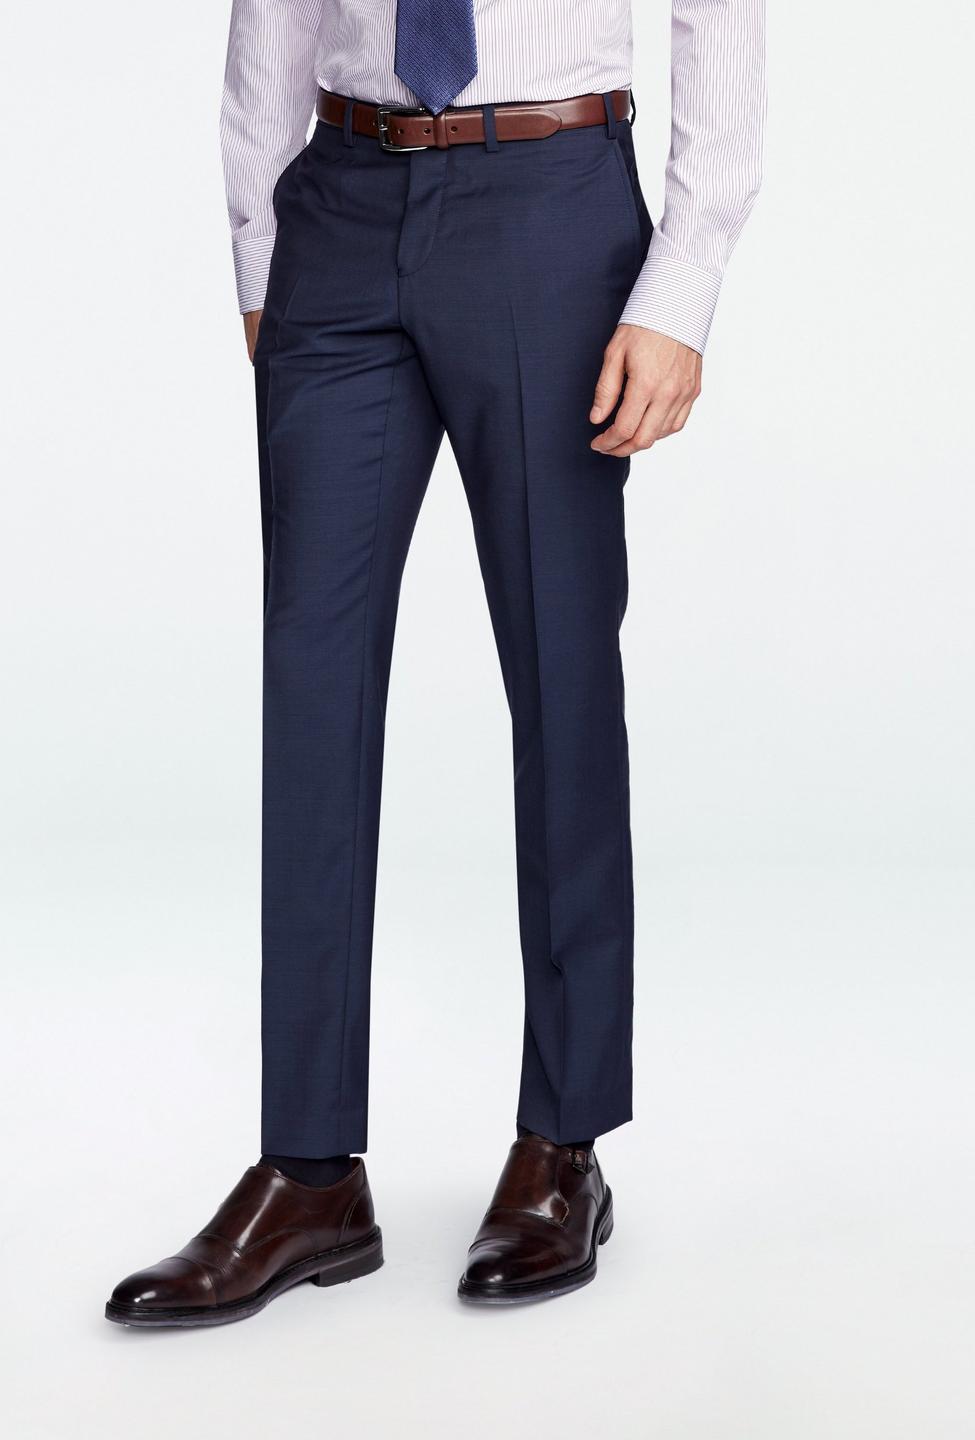 Blue pants - Hamilton Solid Design from Luxury Indochino Collection